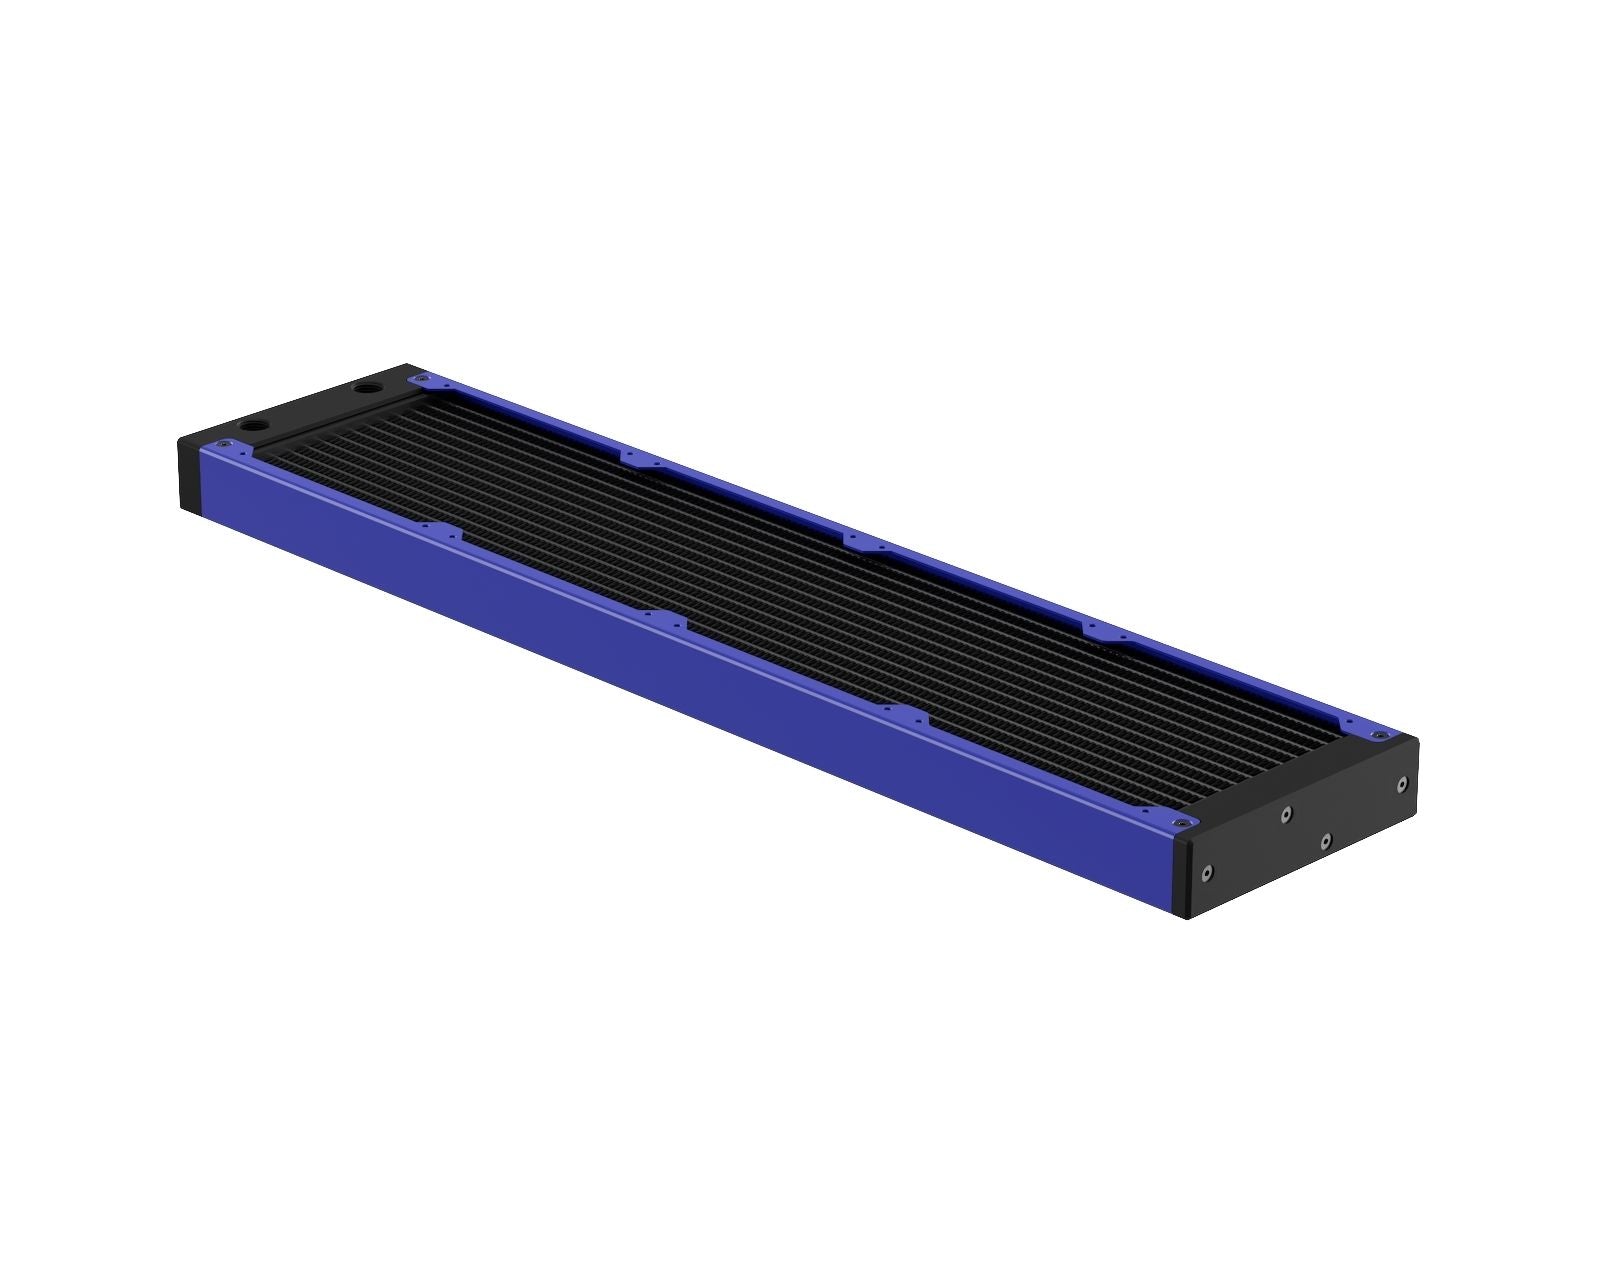 PrimoChill 480SL (30mm) EXIMO Modular Radiator, Black POM, 4x120mm, Quad Fan (R-SL-BK48) Available in 20+ Colors, Assembled in USA and Custom Watercooling Loop Ready - True Blue